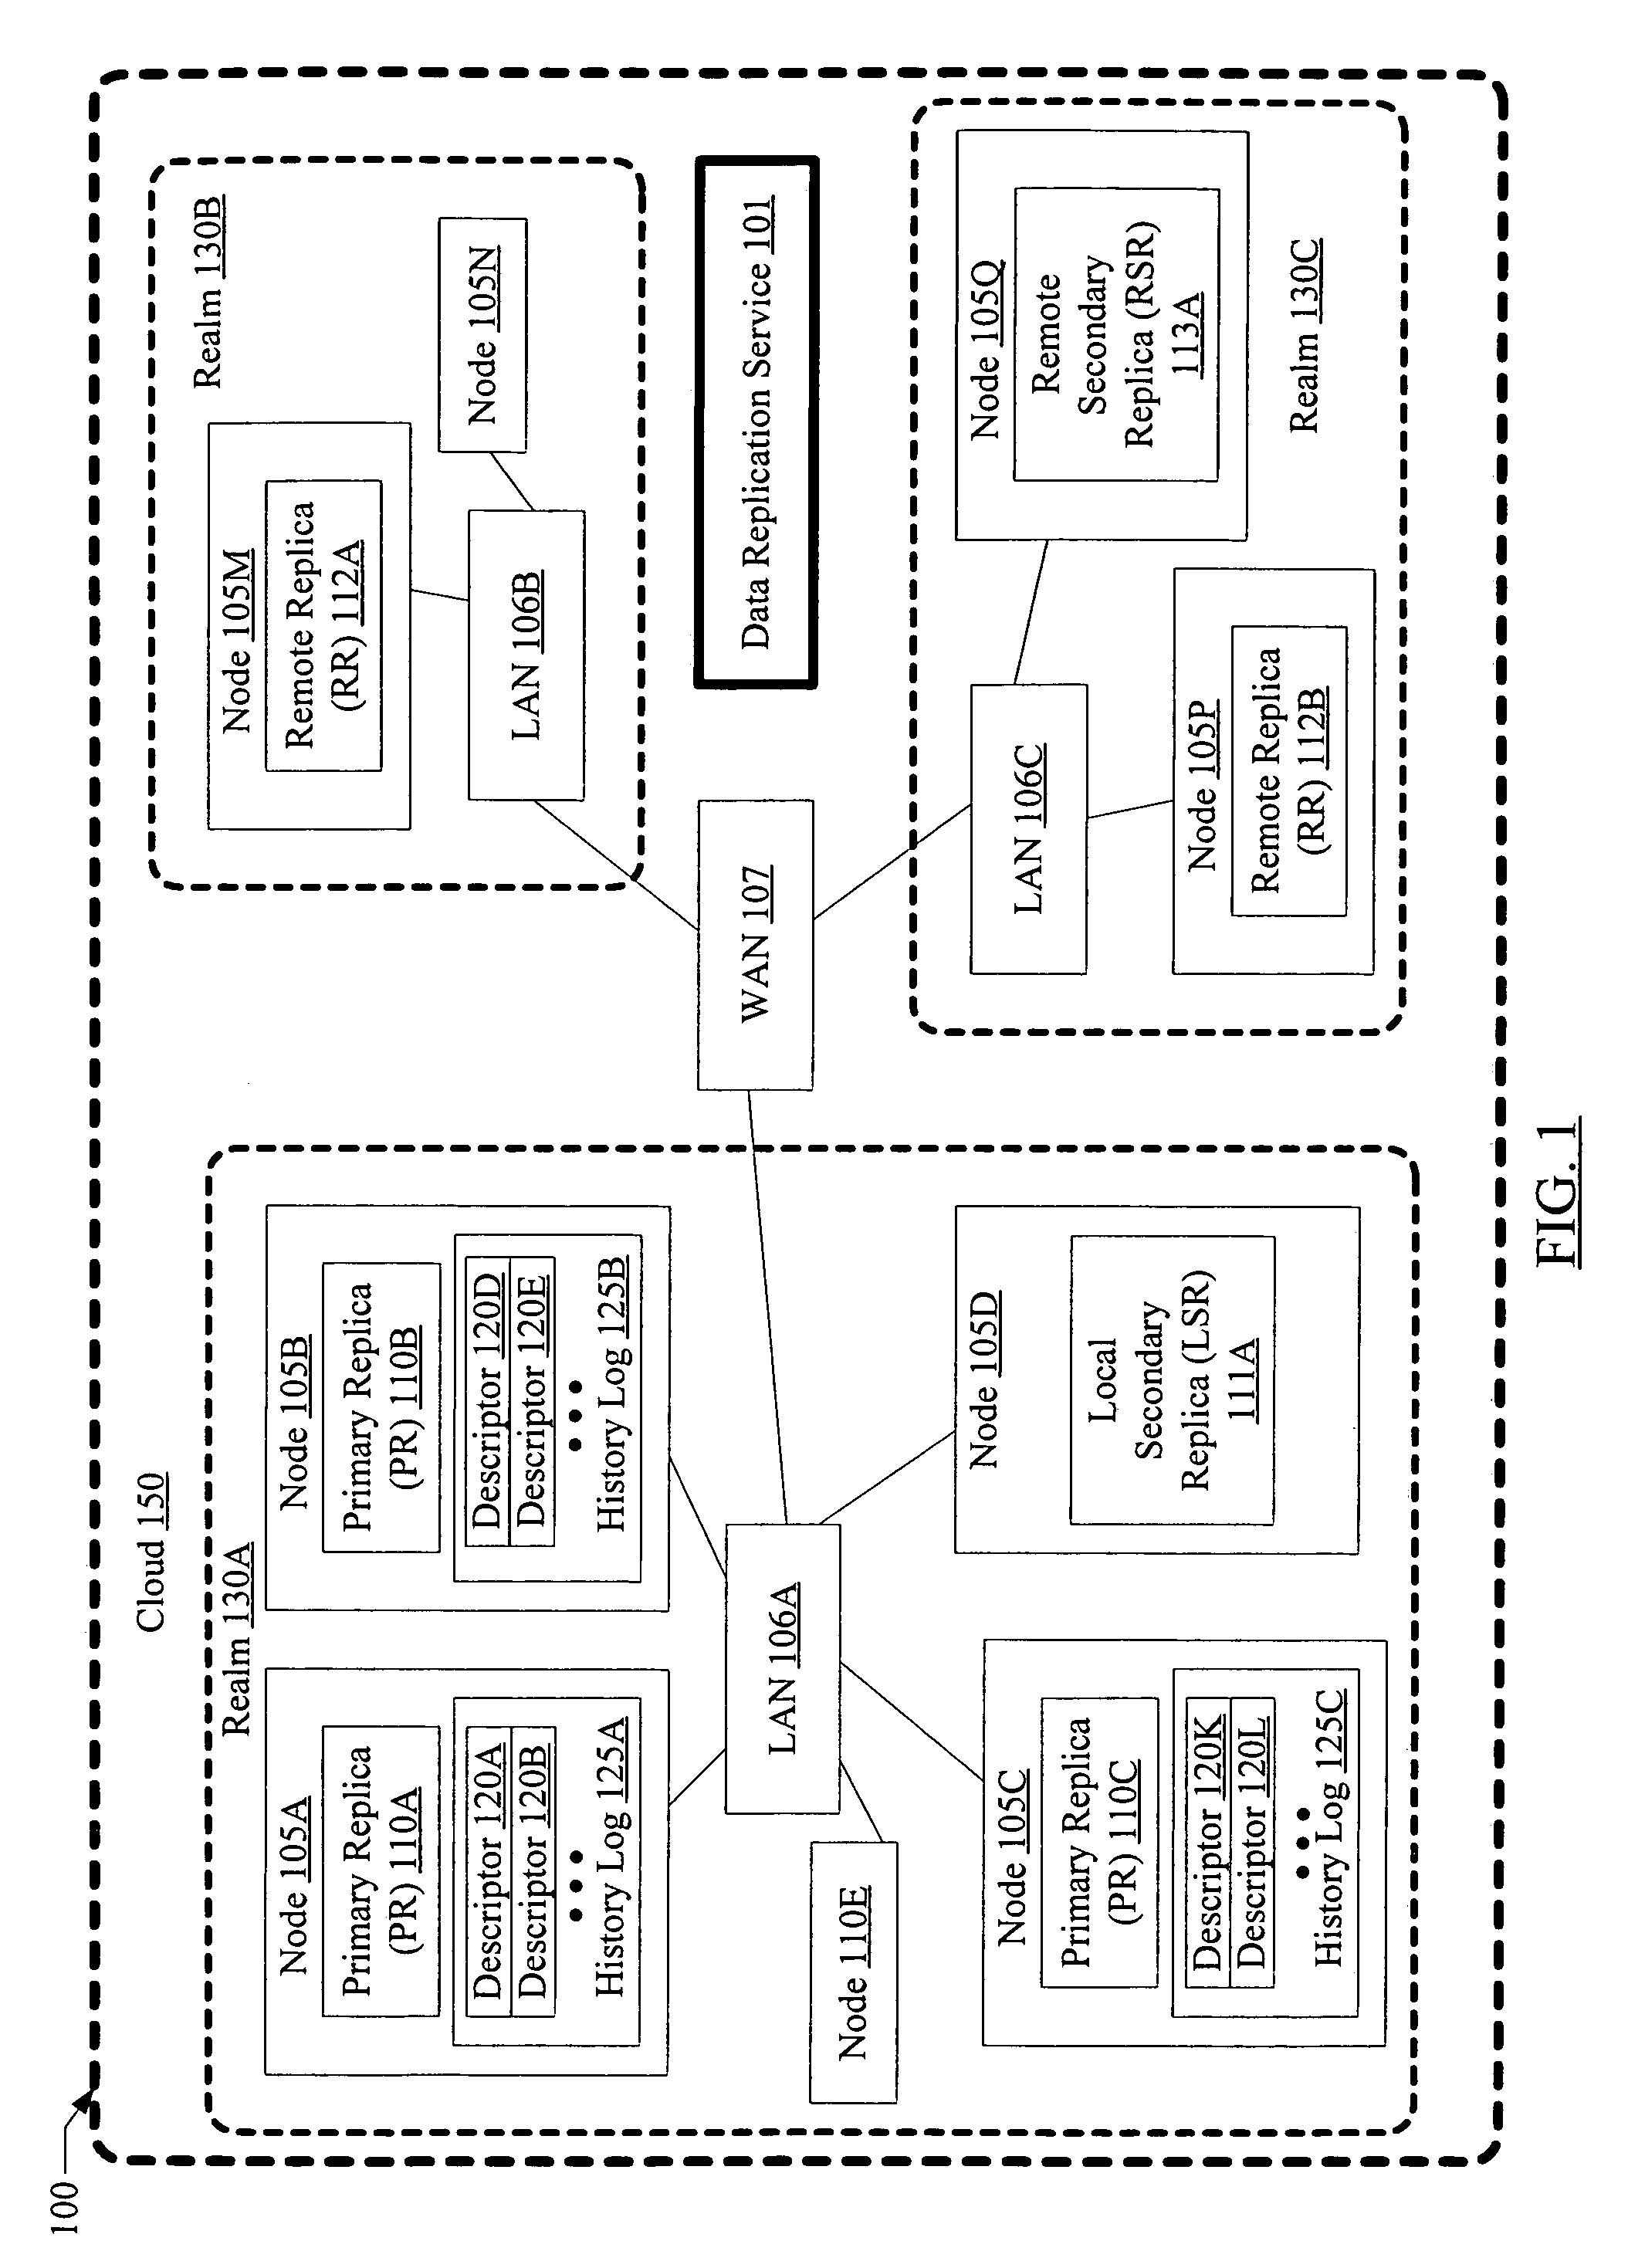 Fault tolerant multi-stage data replication with relaxed coherency guarantees